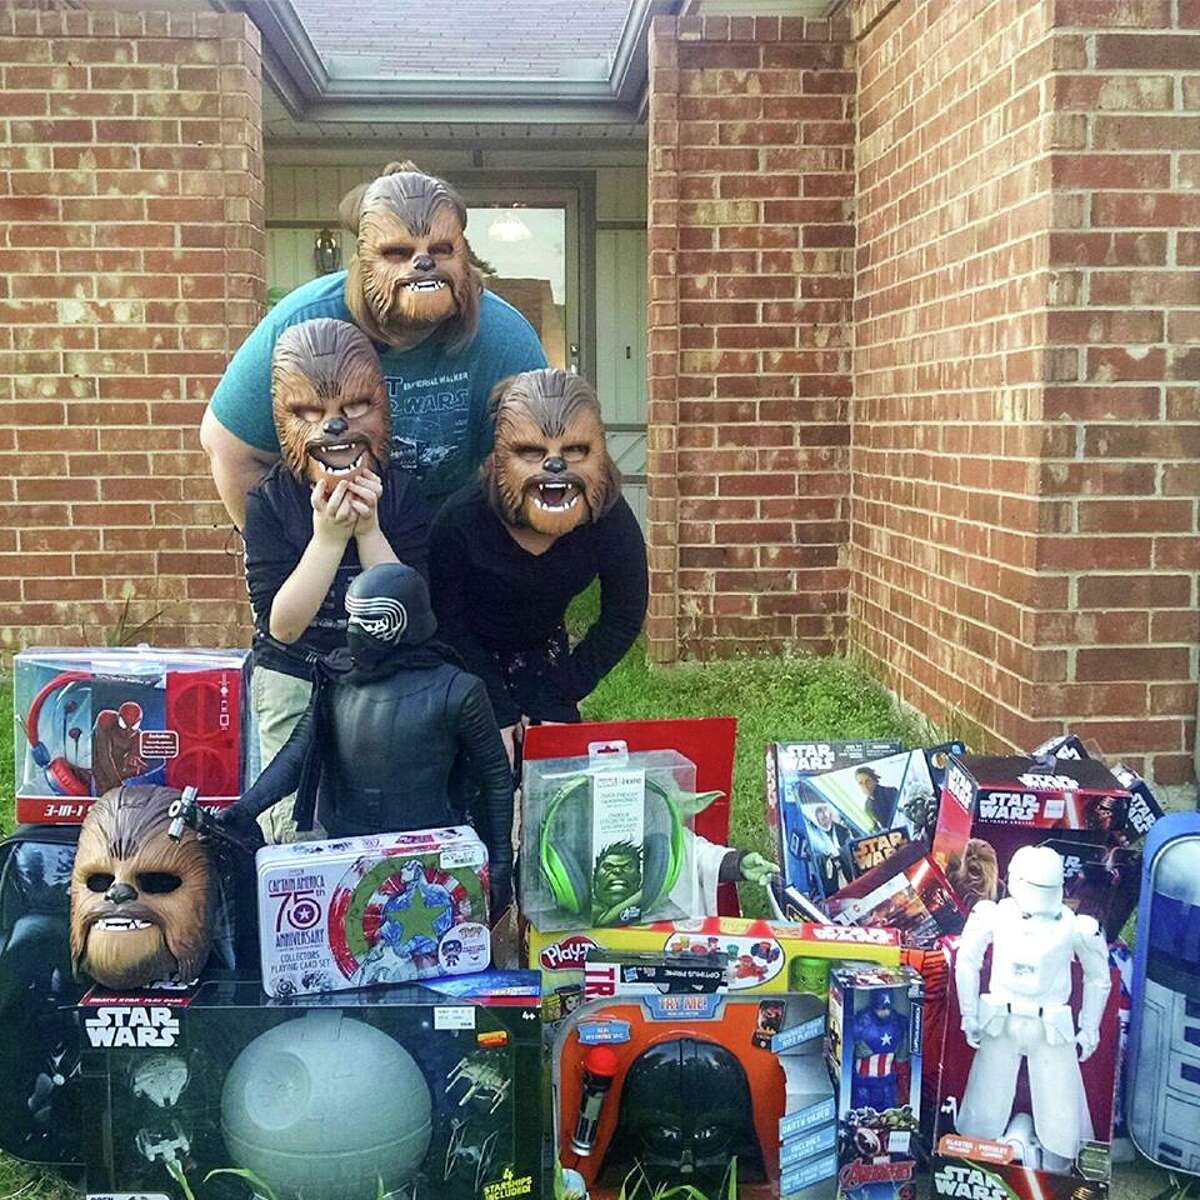 Candace Payne and her two children were surprised by Kohl's representatives with free toys after Payne's video of her trying on a Chewbacca mask went viral on Facebook.